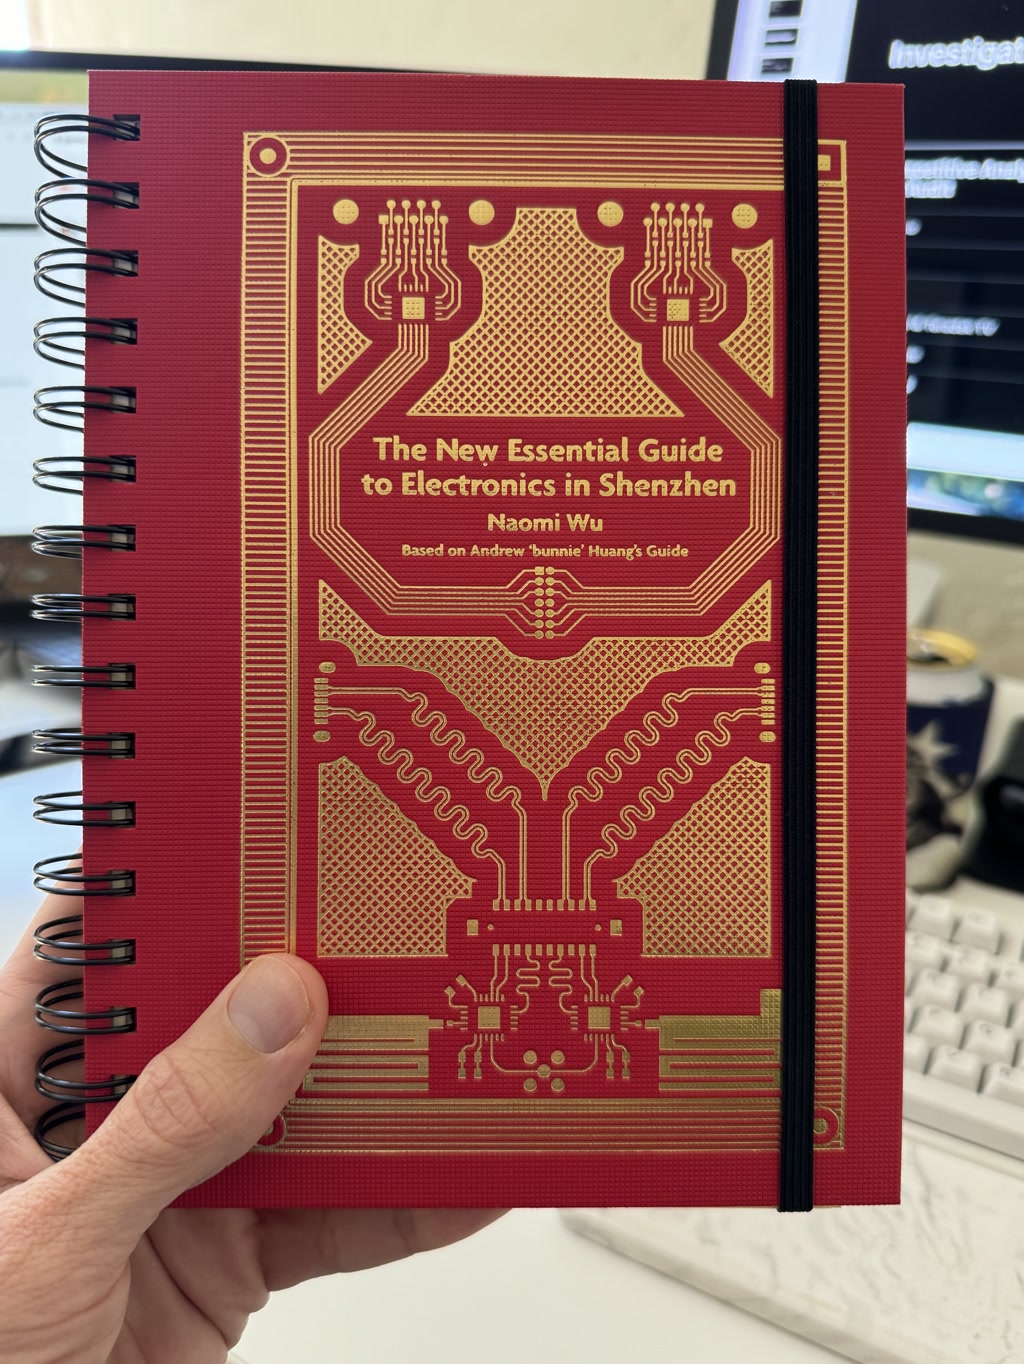 The item shown appears to be a spiral-bound notebook with a hardcover featuring a gold-yellow printed circuit board (PCB) design on a red background. The cover design features intricate circuitry patterns typical of electronic devices, suggesting a technical or educational theme to the contents of the notebook. The PCB tracks lead to a central figure evocative of an integrated circuit or microchip. The notebook has a black elastic band to keep it closed.